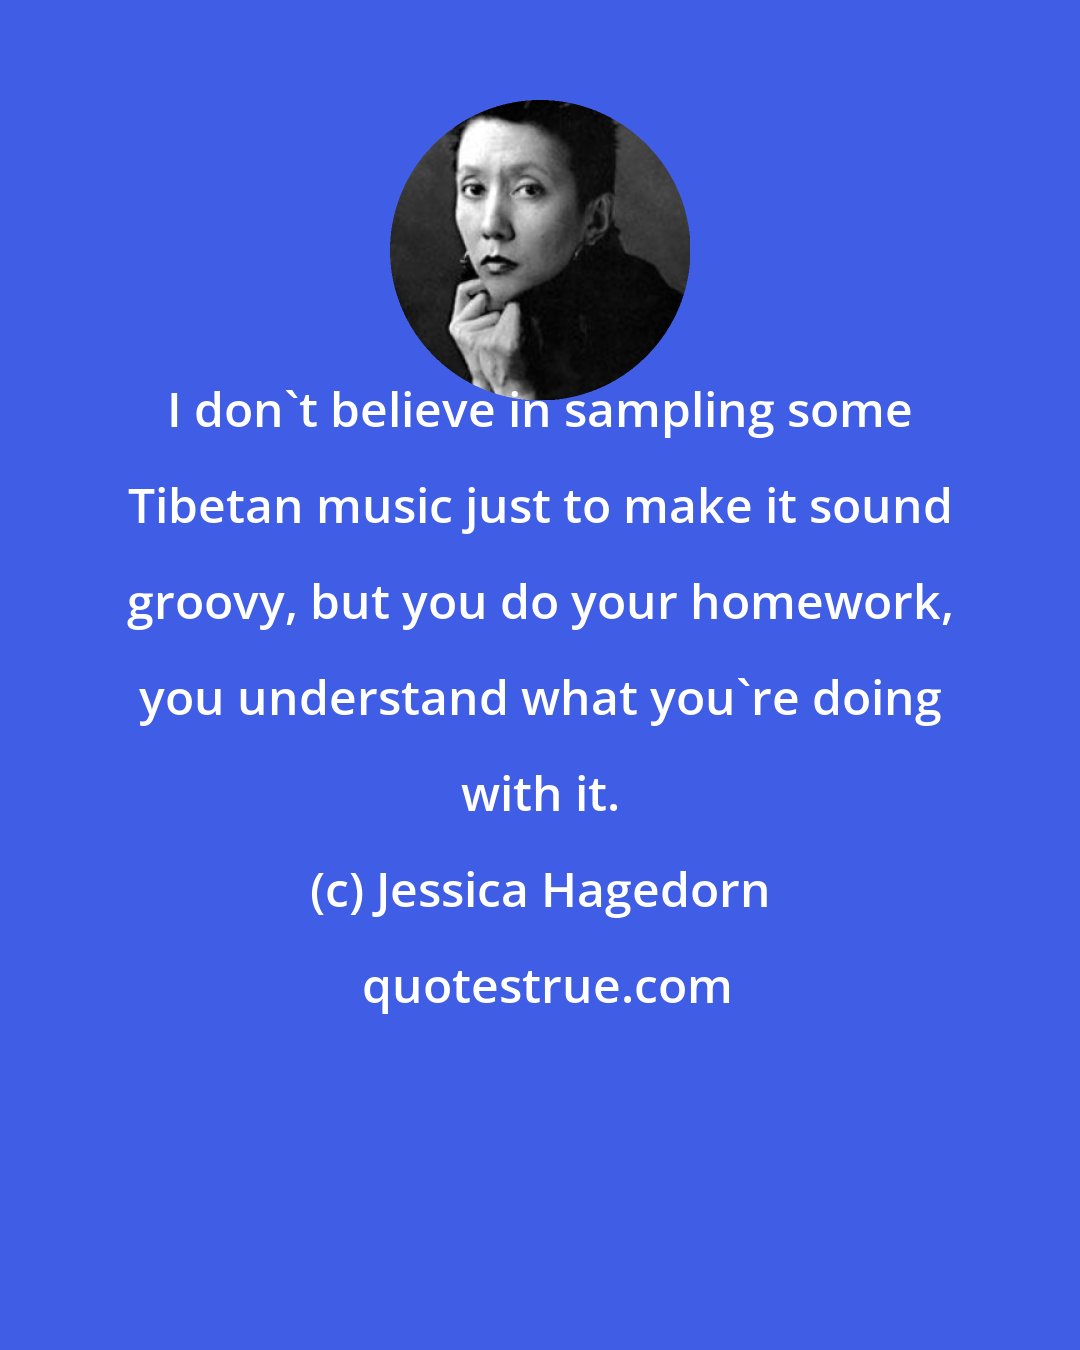 Jessica Hagedorn: I don't believe in sampling some Tibetan music just to make it sound groovy, but you do your homework, you understand what you're doing with it.